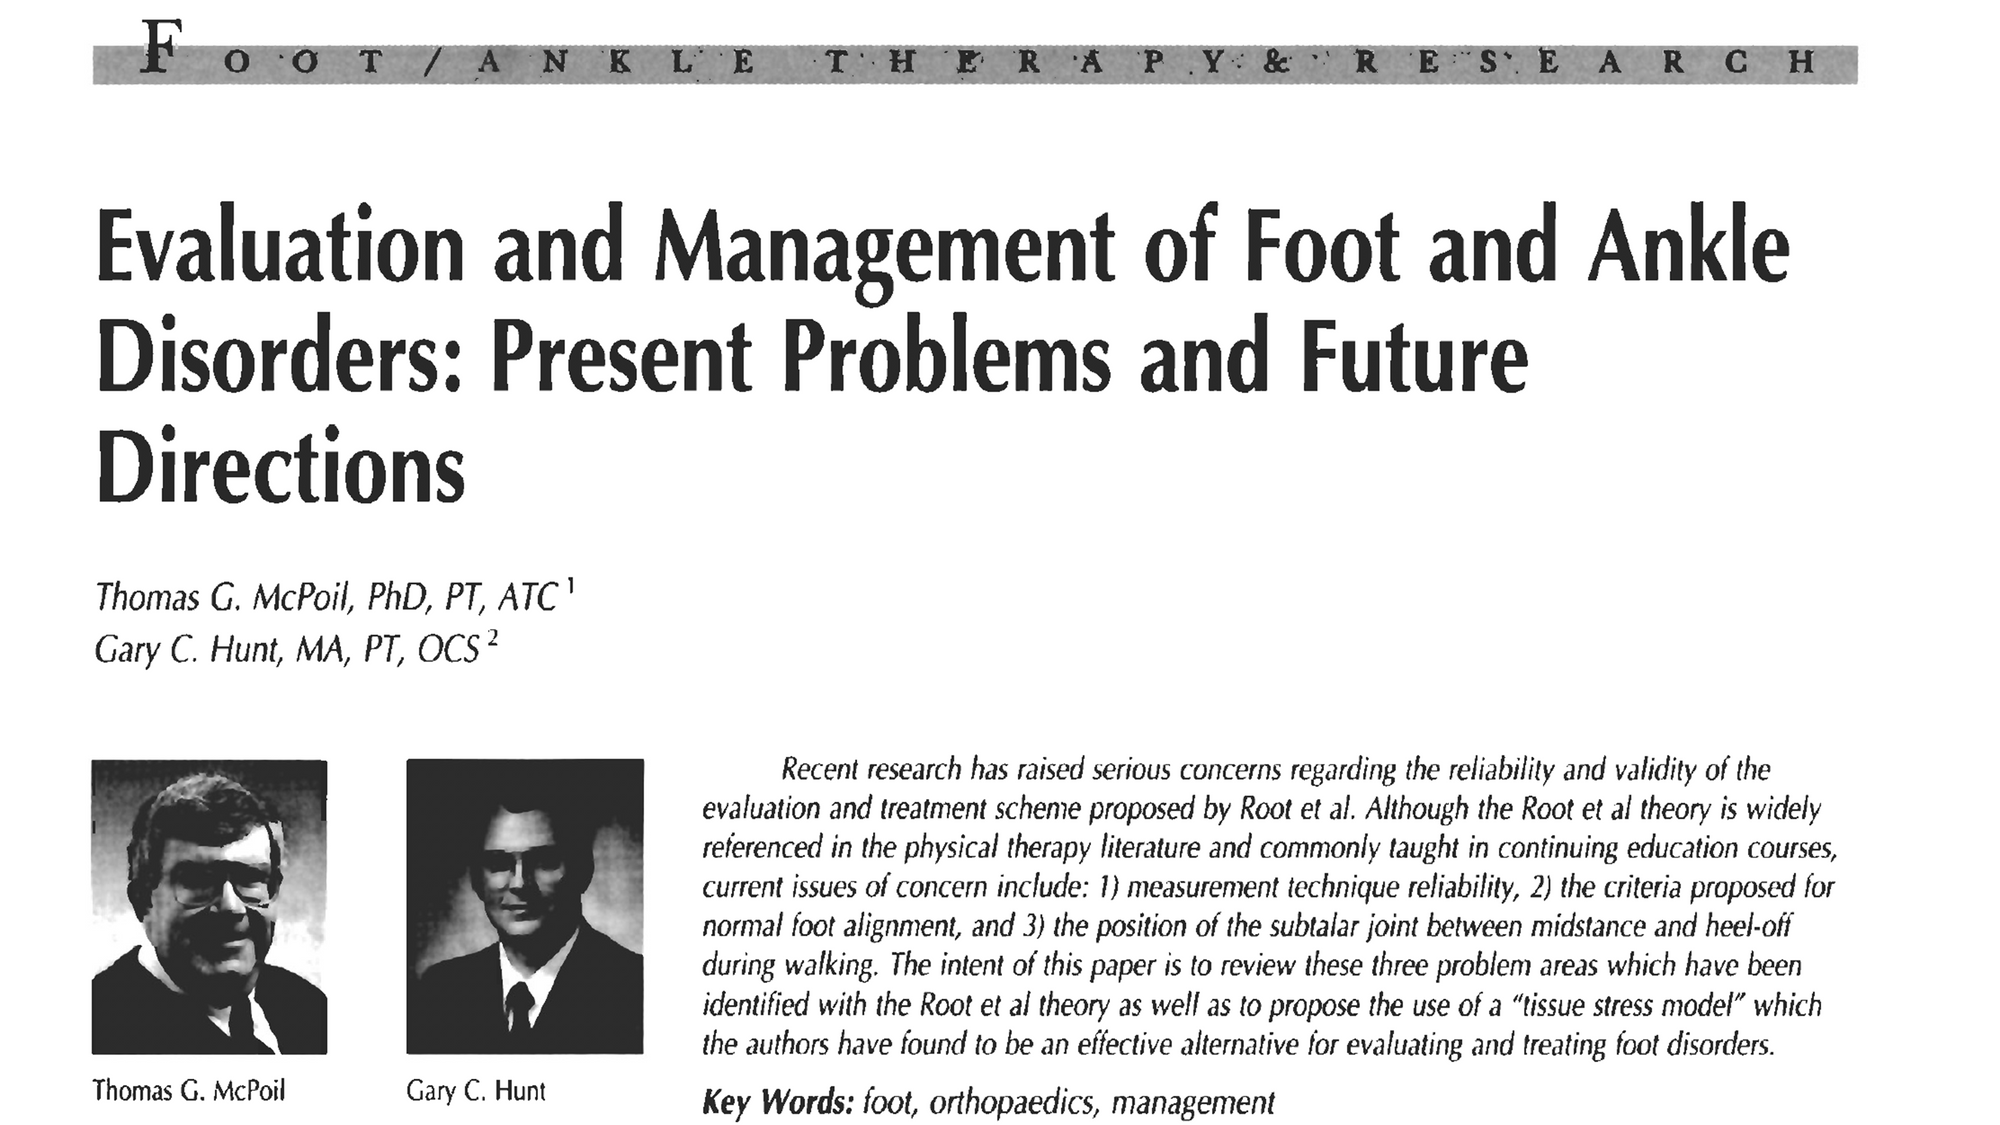 Evaluation and Management of Foot and Ankle Disorders